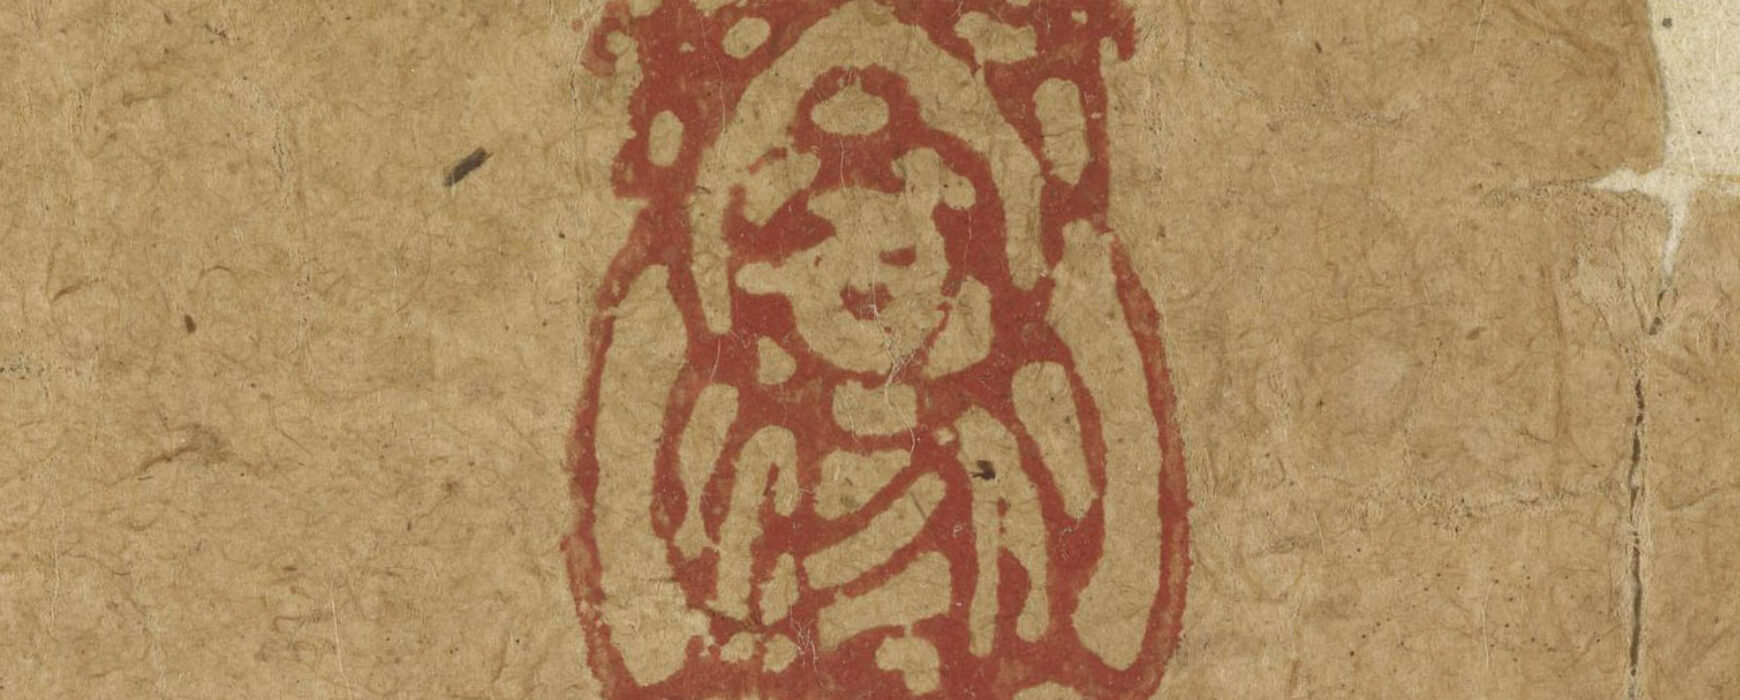 Workshop with Emerging Scholars and Chunwen Hao: Chinese Buddhism and Dunhuang Manuscripts